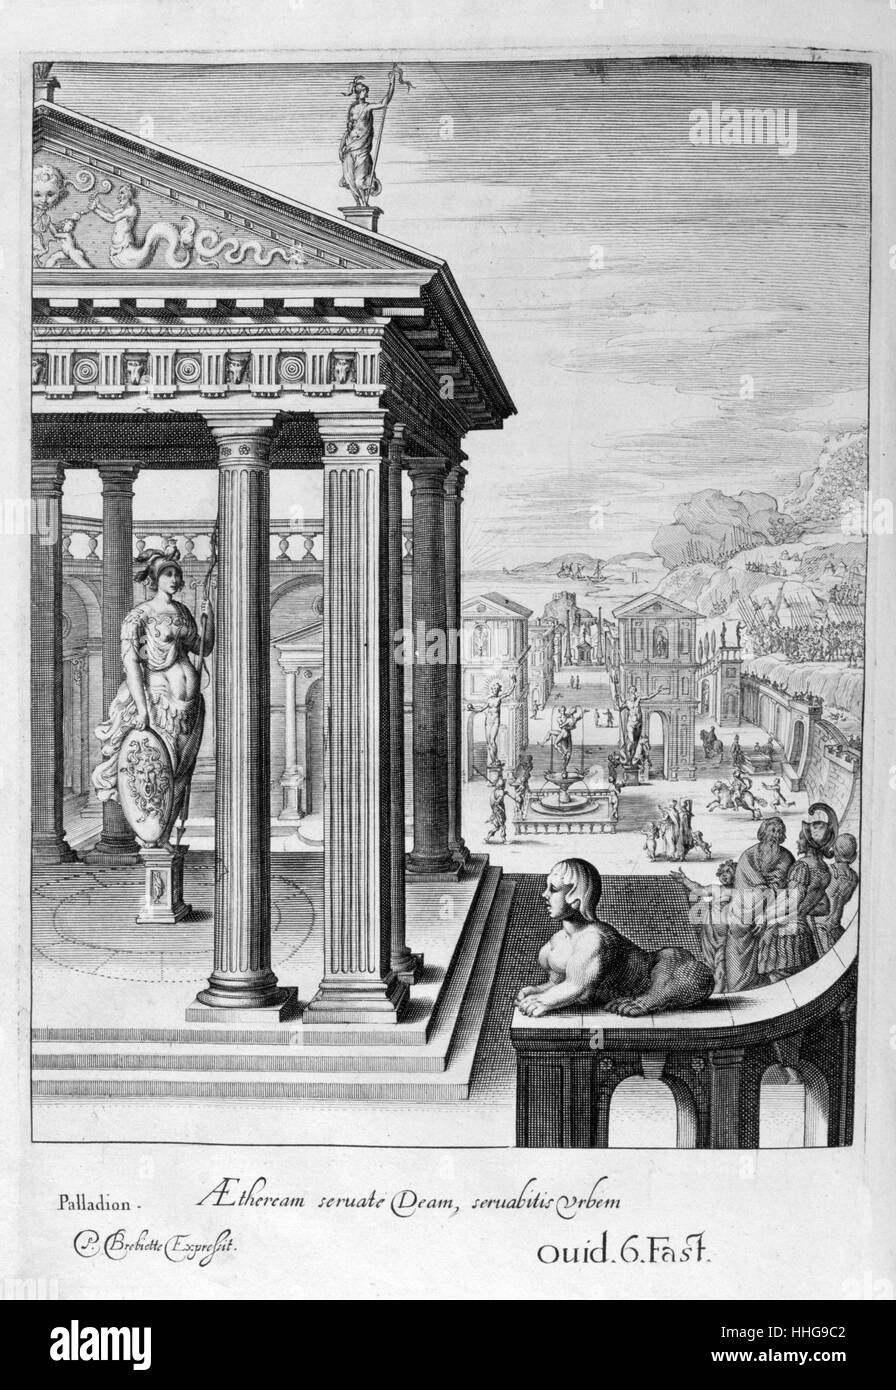 In Greek and Roman mythology, the palladium or palladion was a cult image, on which the safety of Troy and later Rome was said to depend, the wooden statue (xoanon) of Pallas Athena that Odysseus and Diomedes stole from Troy , was later taken to the future site of Rome by Aeneas. Engraving from 'Tableaux du temple des muses' (1655) by Michel de Marolles (1600 - 1681), known as the abbé de Marolles; a French churchman and translator. Stock Photo